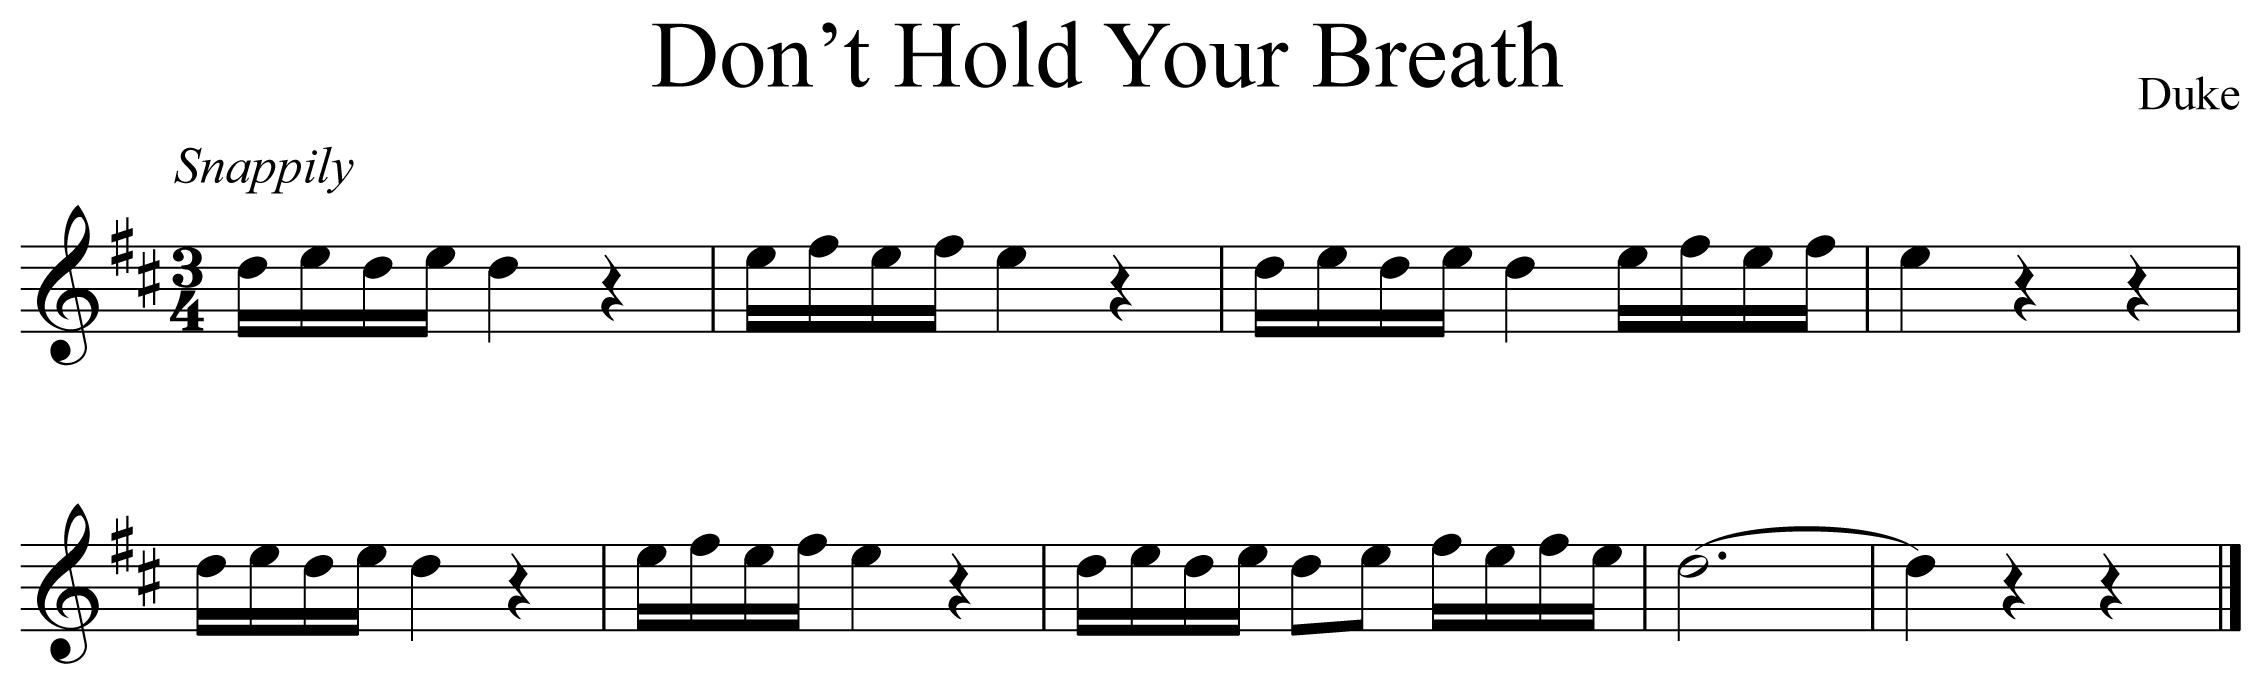 Don't Hold Your Breath Music Notation Saxophone